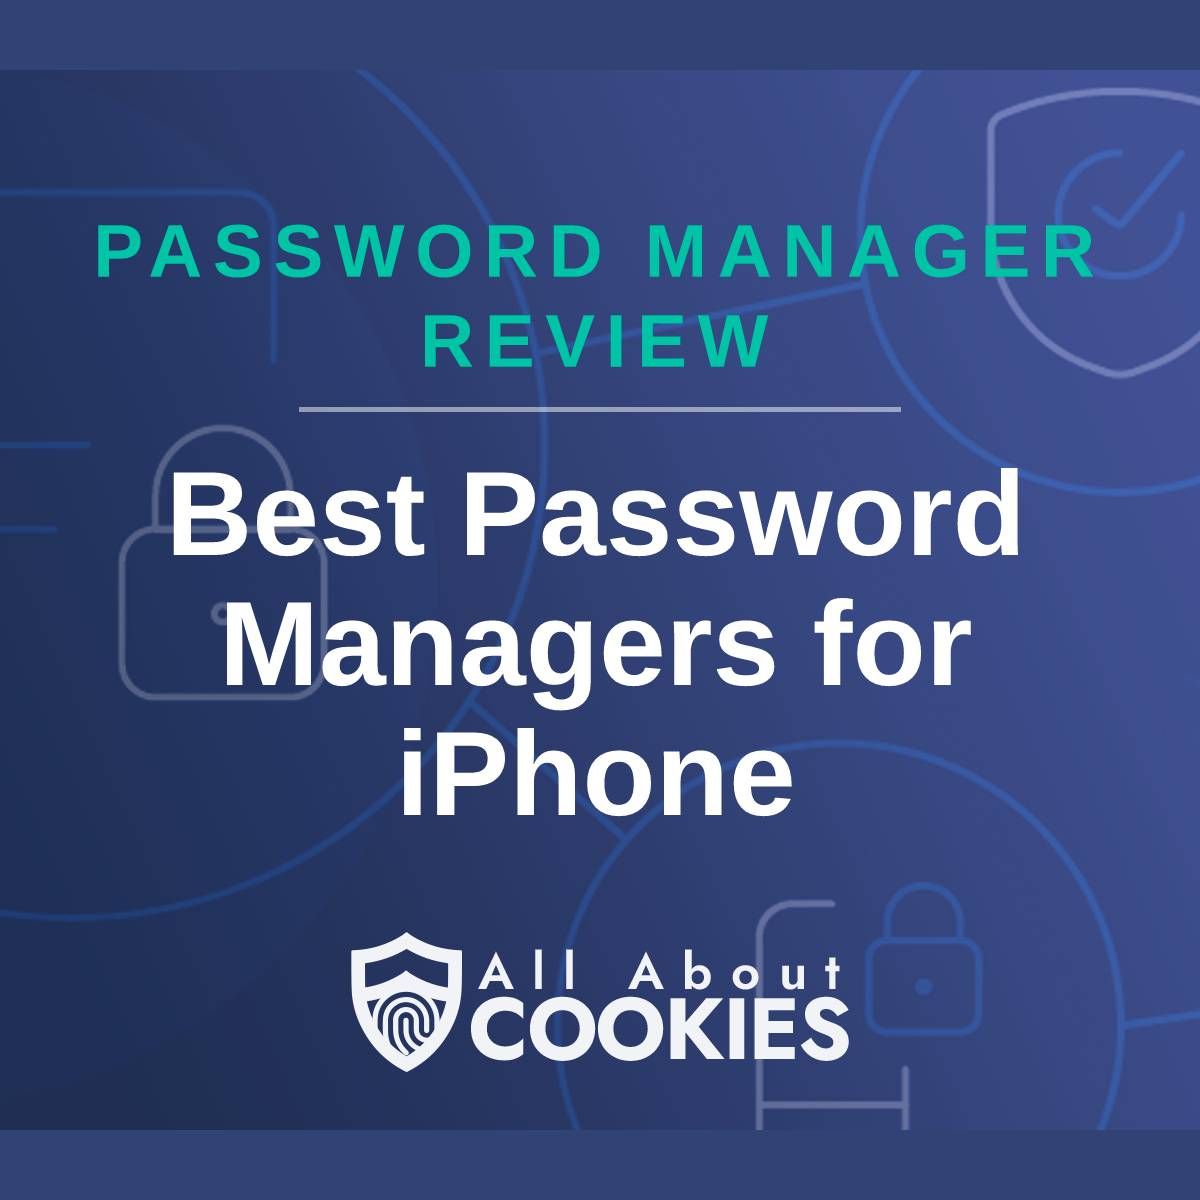 A blue background with images of locks and shields with the text &quot;Password Manager Review Best Password Managers for iPhone&quot; and the All About Cookies logo. 